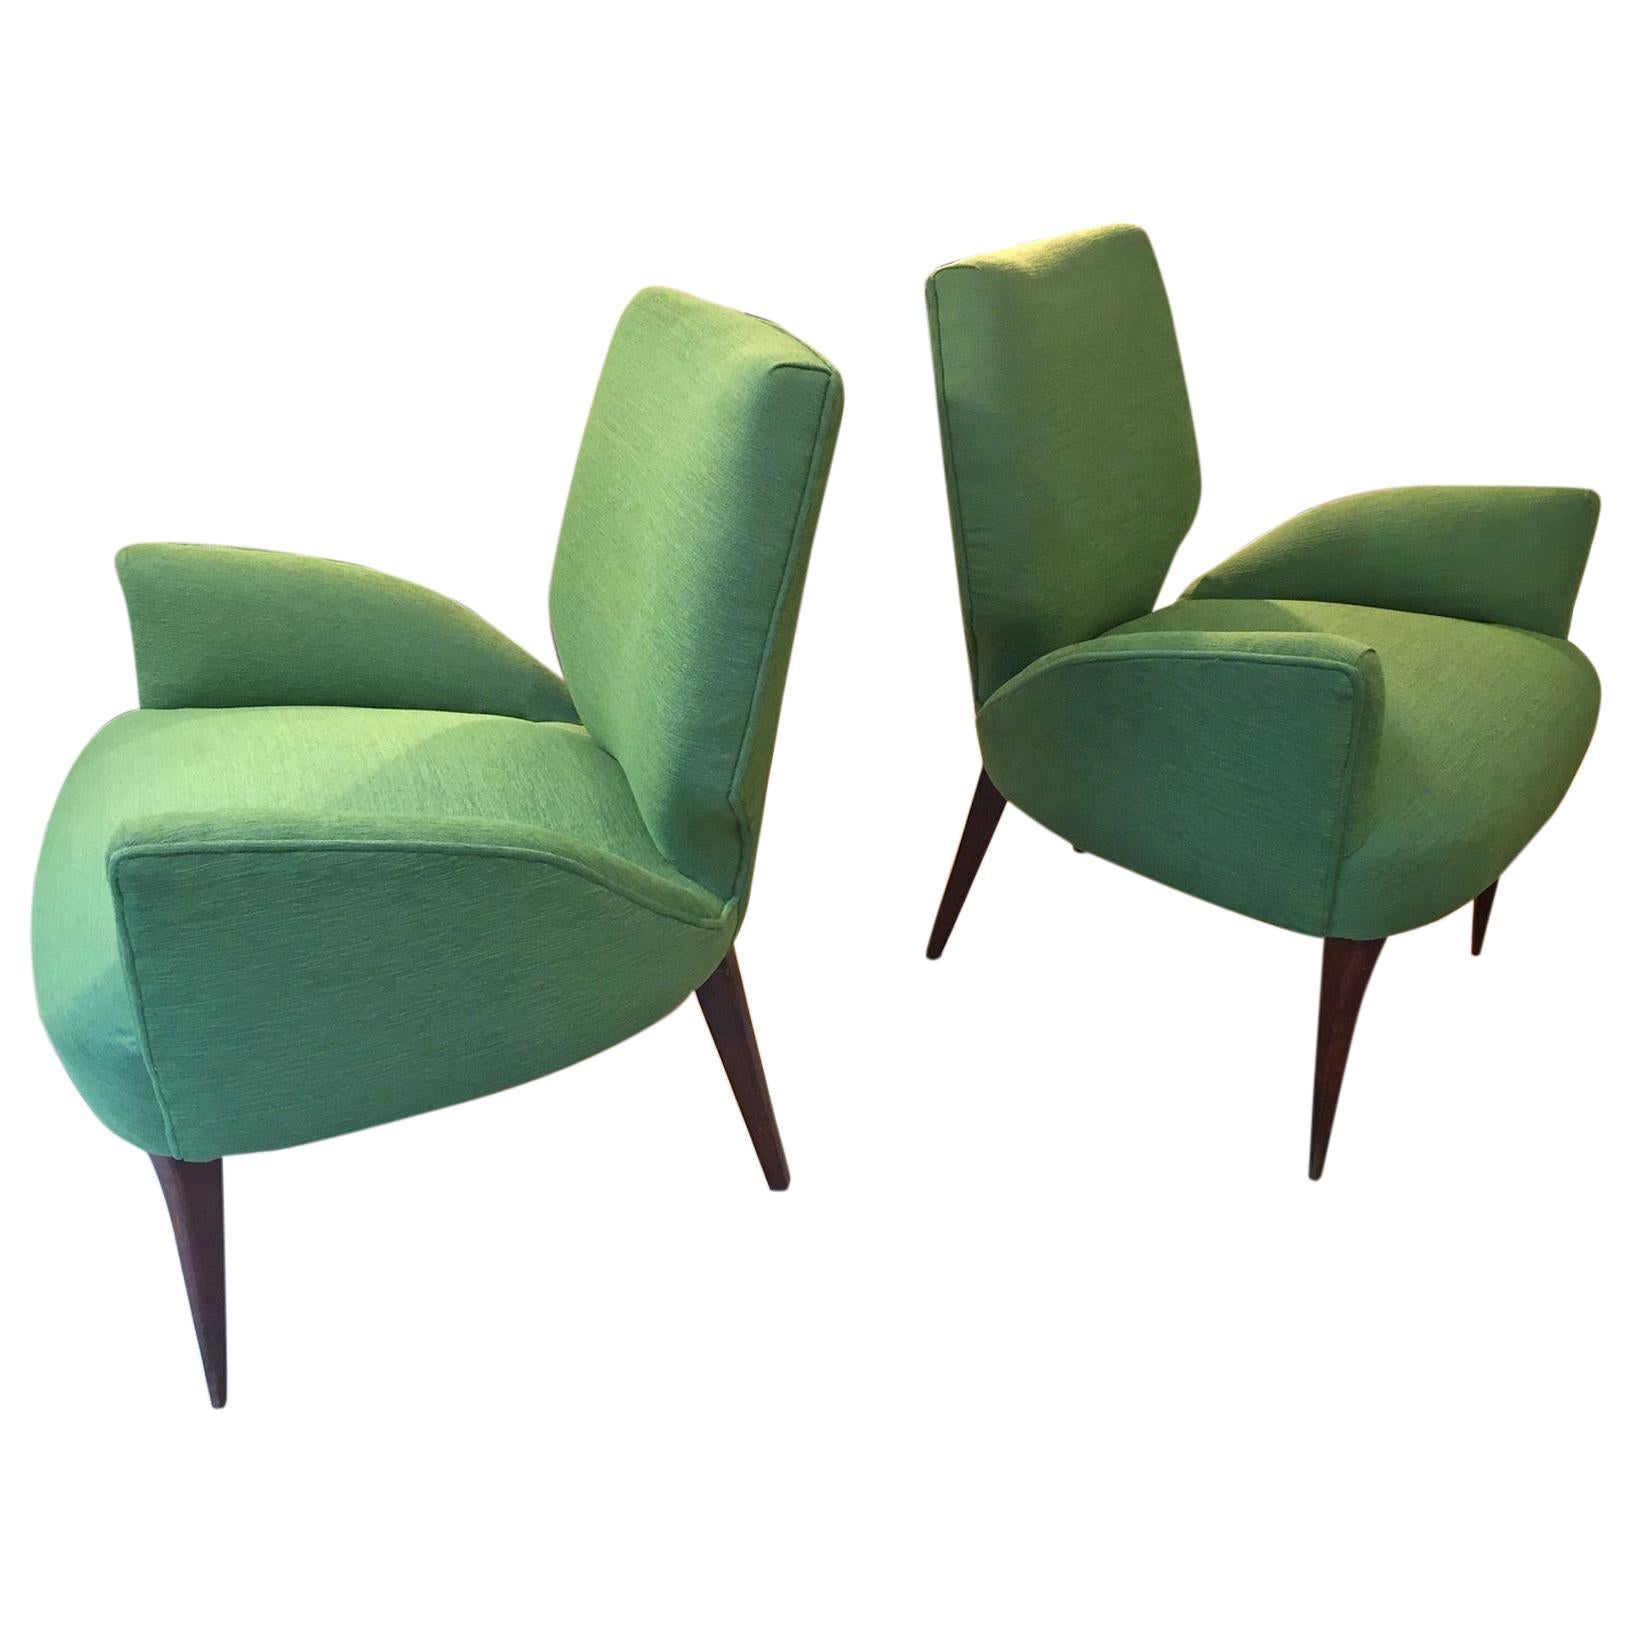 Gio Ponti Style Armchairs, 1950 For Sale